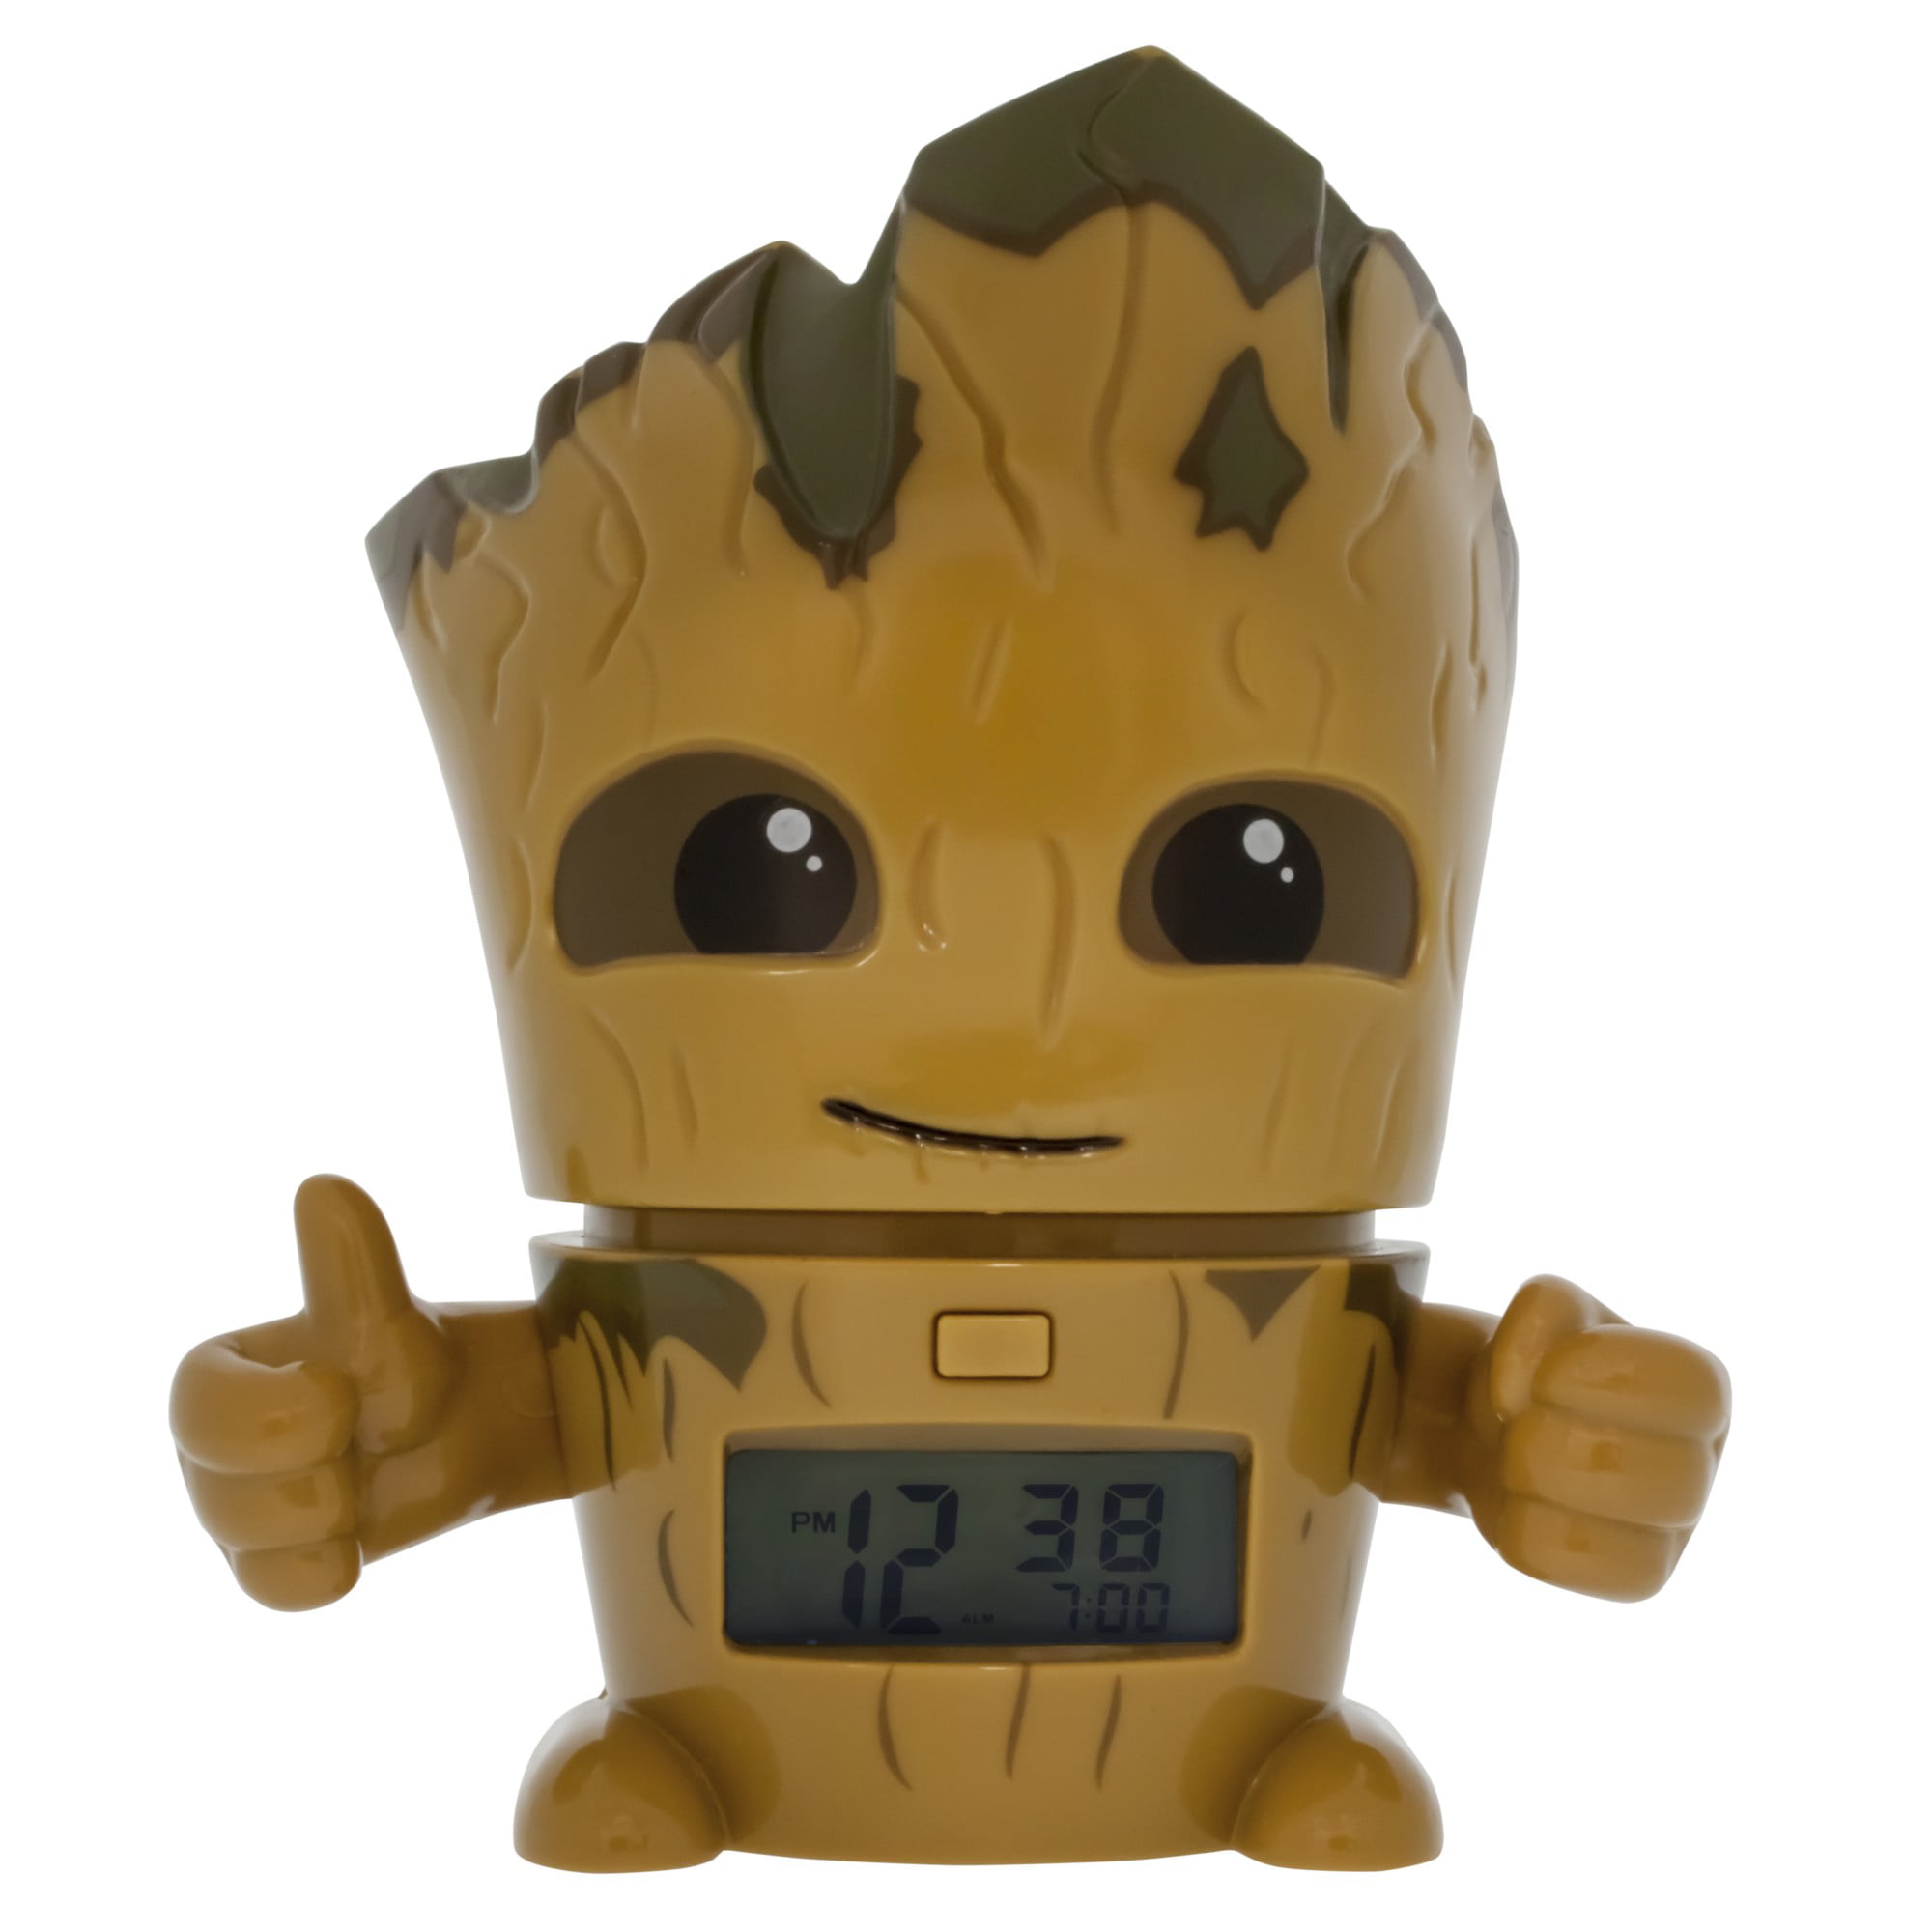 Guardians OF THE Galaxy Alarm Desk Clock 3.75" Room Decor E42 Nice for Gifts 